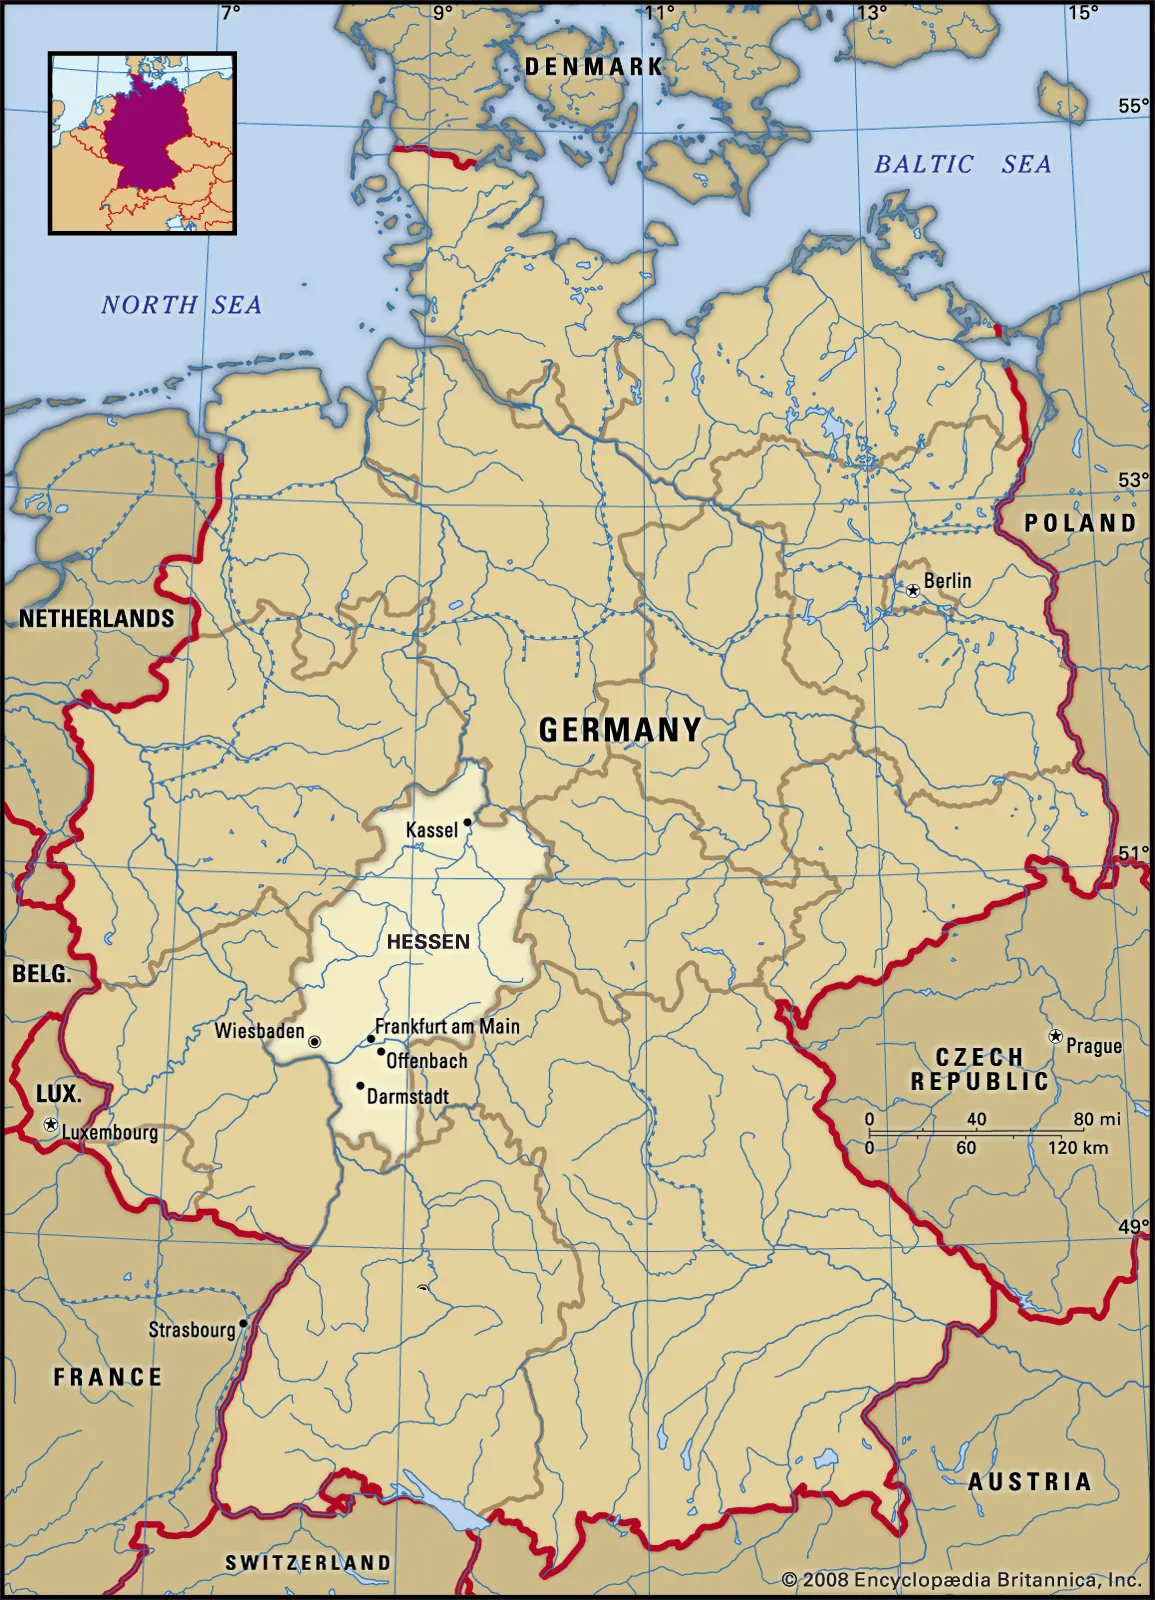 ^ Nation-State Example - Germany